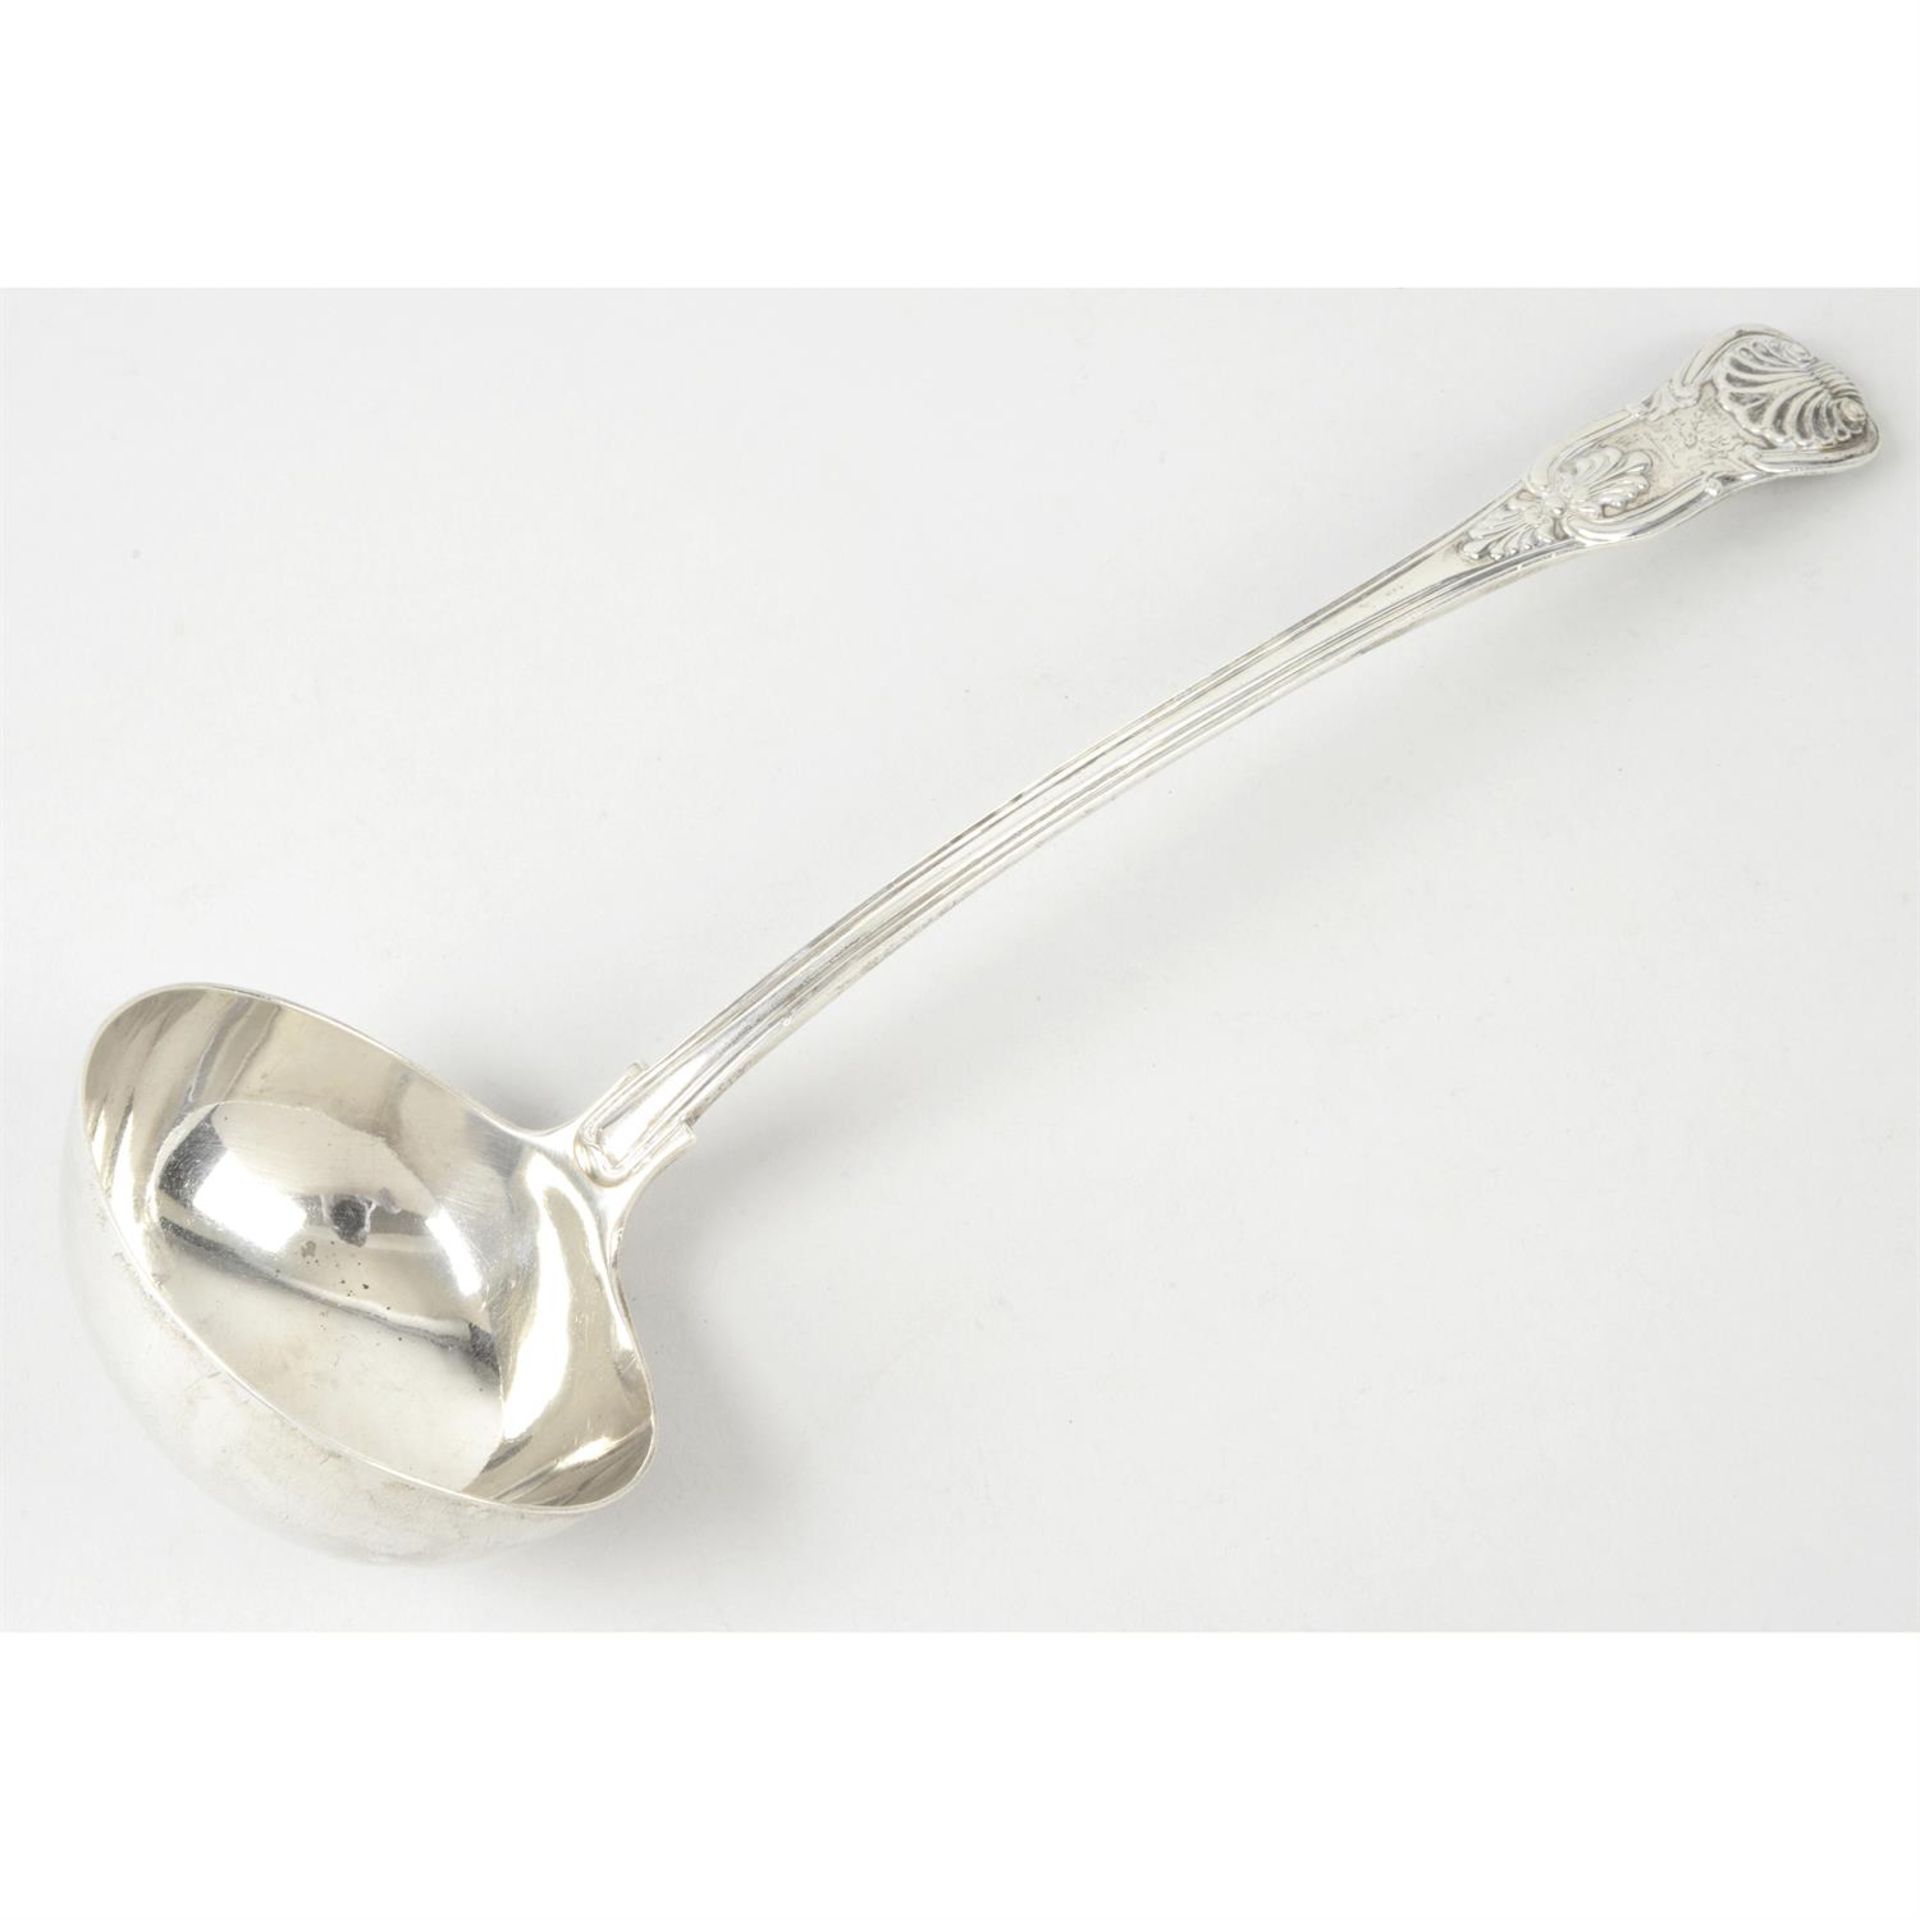 A mid-Victorian silver soup ladle in King's pattern.